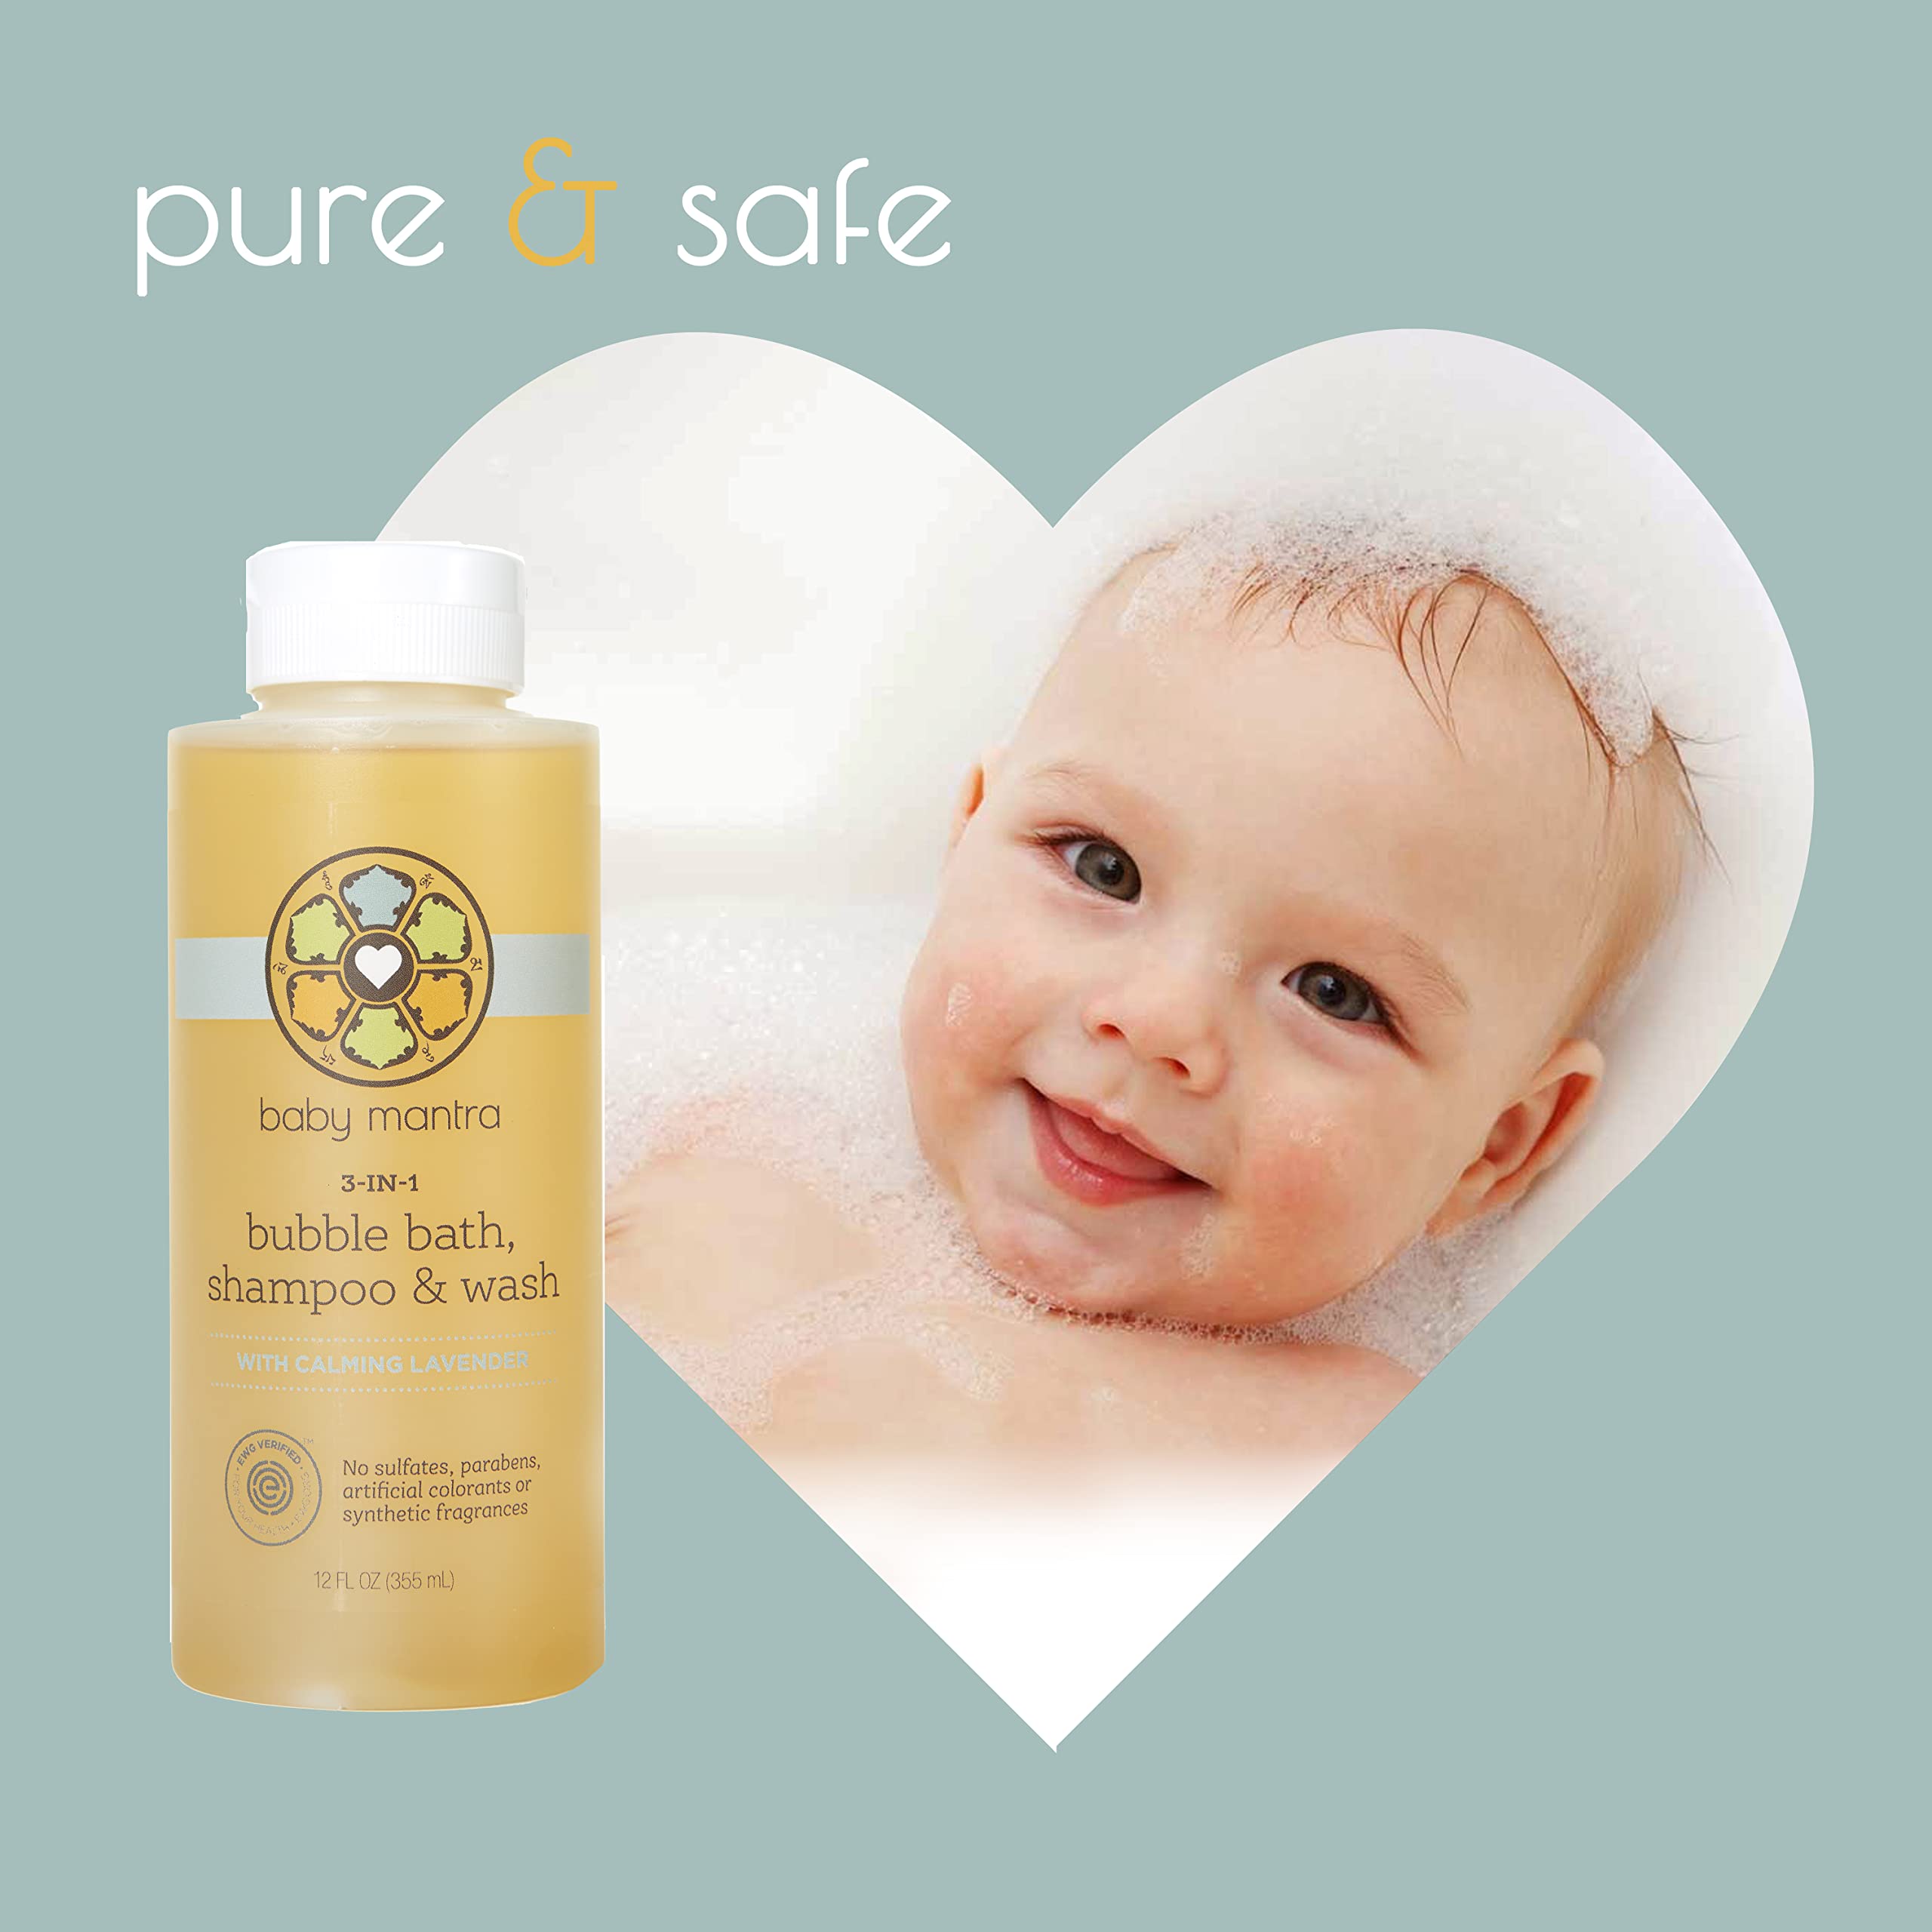 Baby Mantra 3-in-1 Bubble Bath, Shampoo and Body Wash made with Natural, Hypoallergenic, & EWG Verified Ingredients for Infants, Toddlers, and Kids with Sensitive Skin, 12 Fluid Ounces